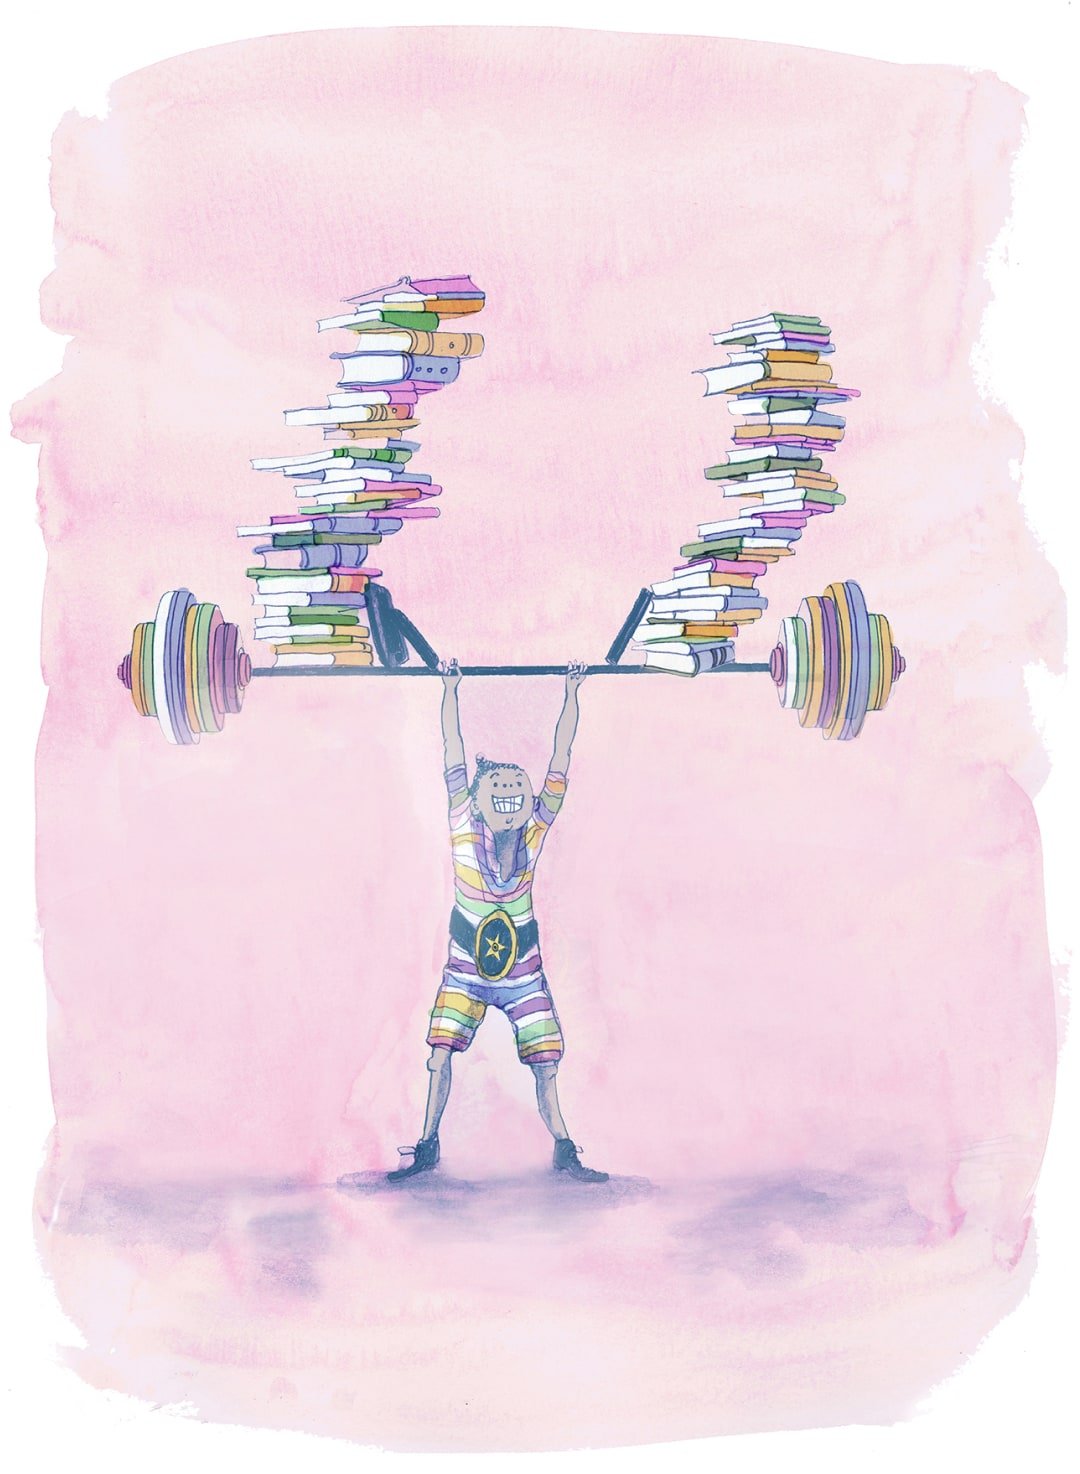 A young girl wearing a weightlifting champion belt lifts a bar of huge, heavy weights, with books stacked on top.